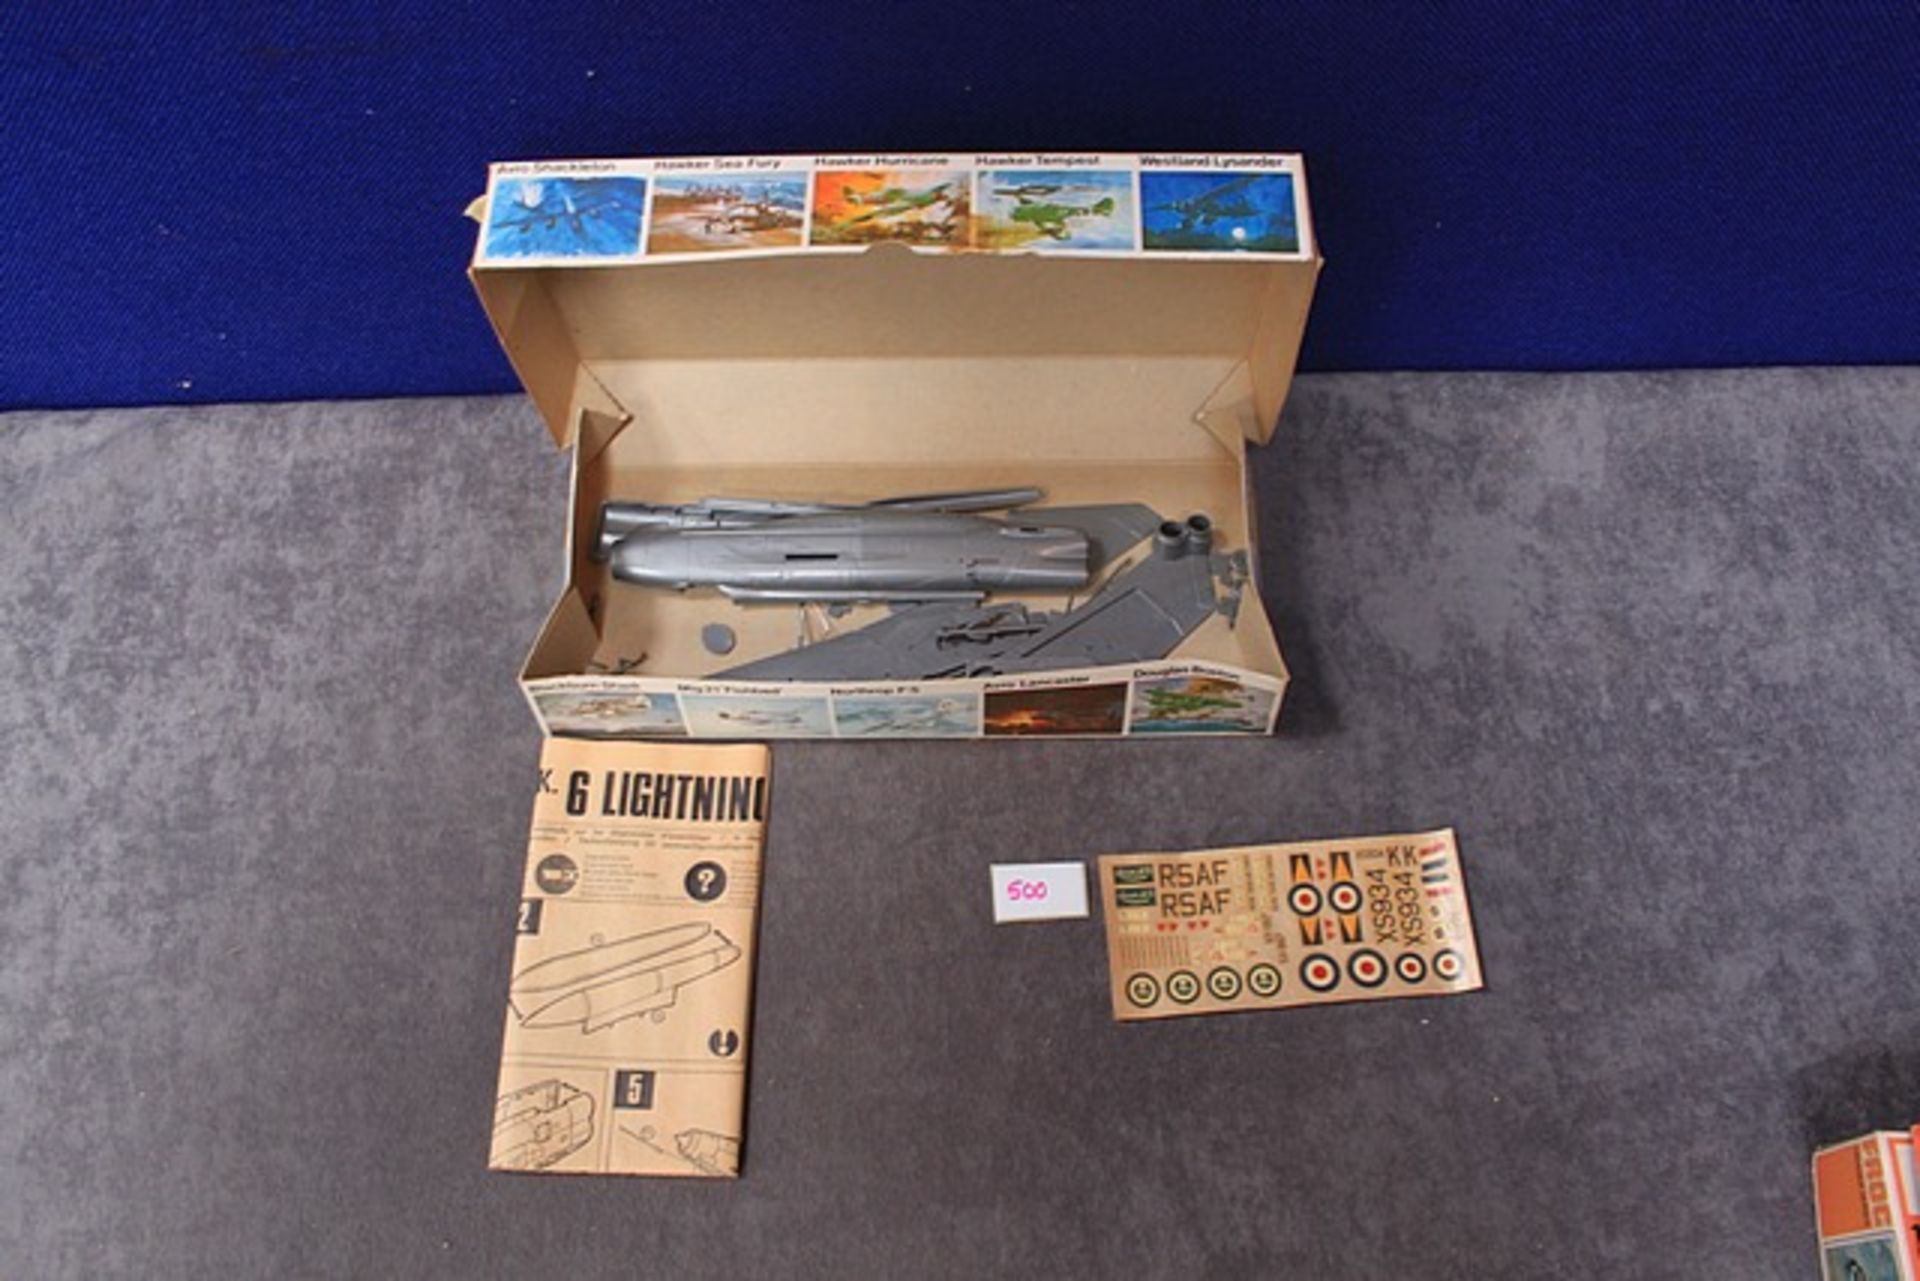 Frog Authentic Scale 1/72 Models Cat No F266 BAC Lightning F-6 Fighter with instructions in box - Image 2 of 2